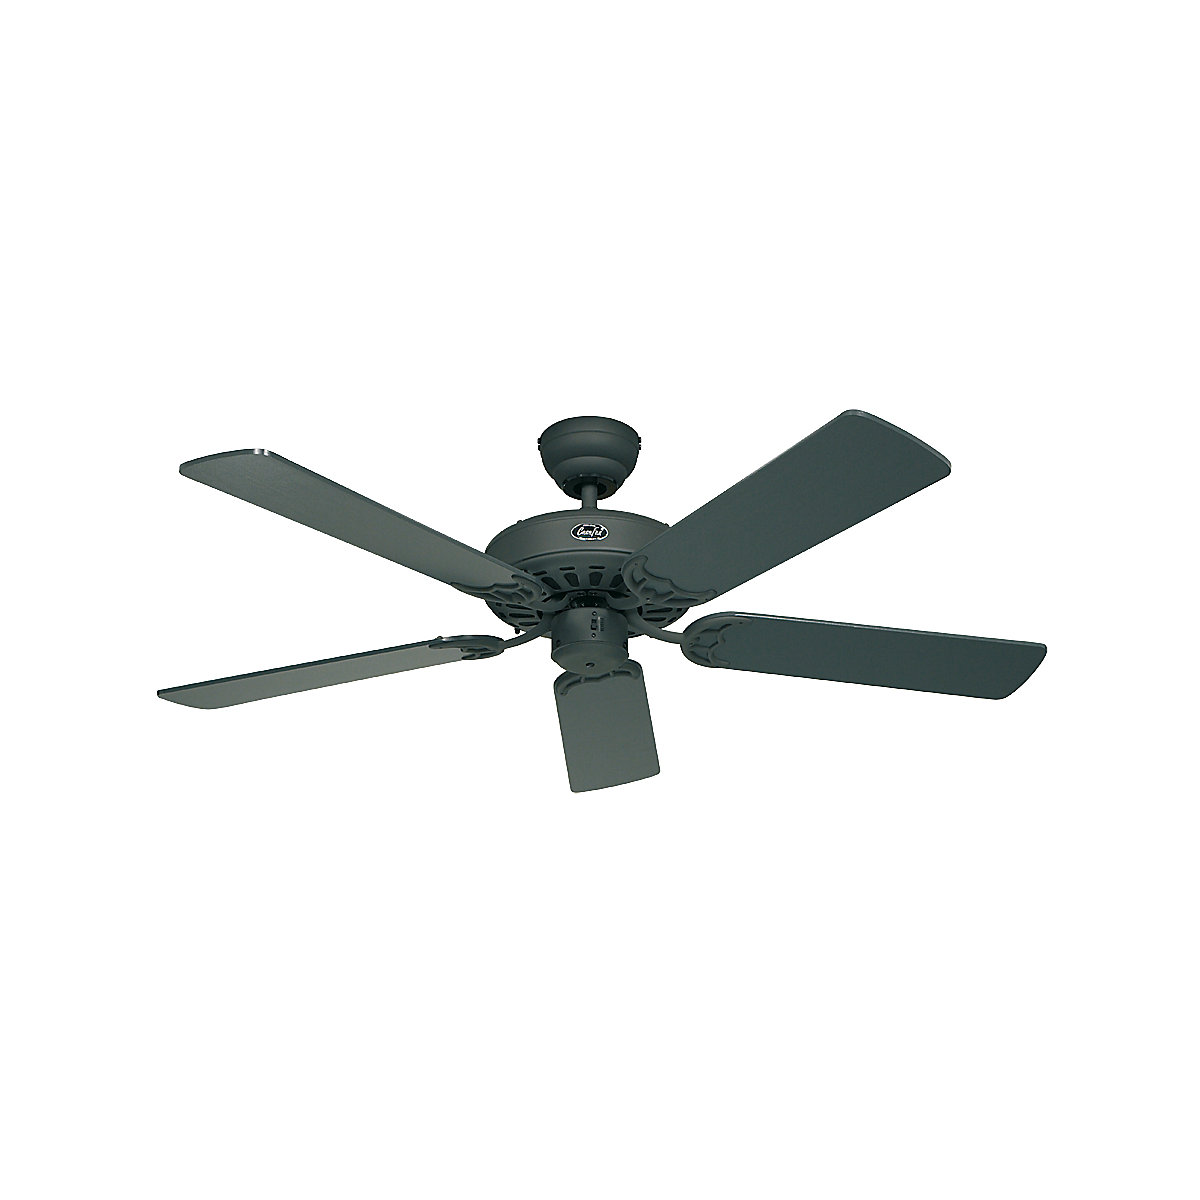 CLASSIC ROYAL ceiling fan, rotor blade Ø 1320 mm, painted graphite-6